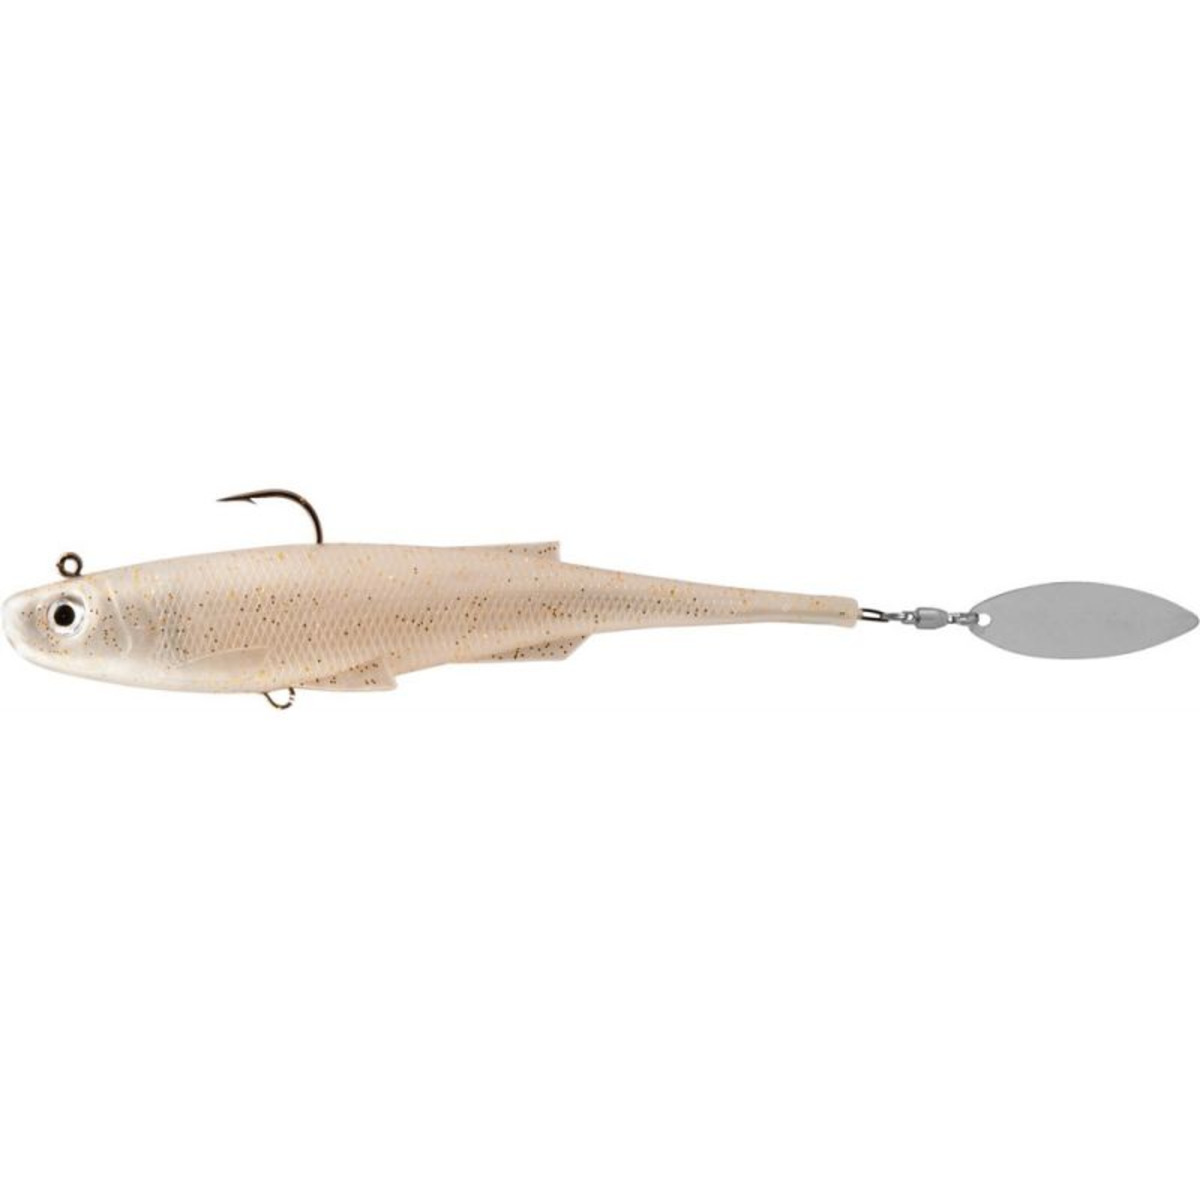 Rapture Mad Spintail Shad - 20.0 g - 100 mm - UV-P